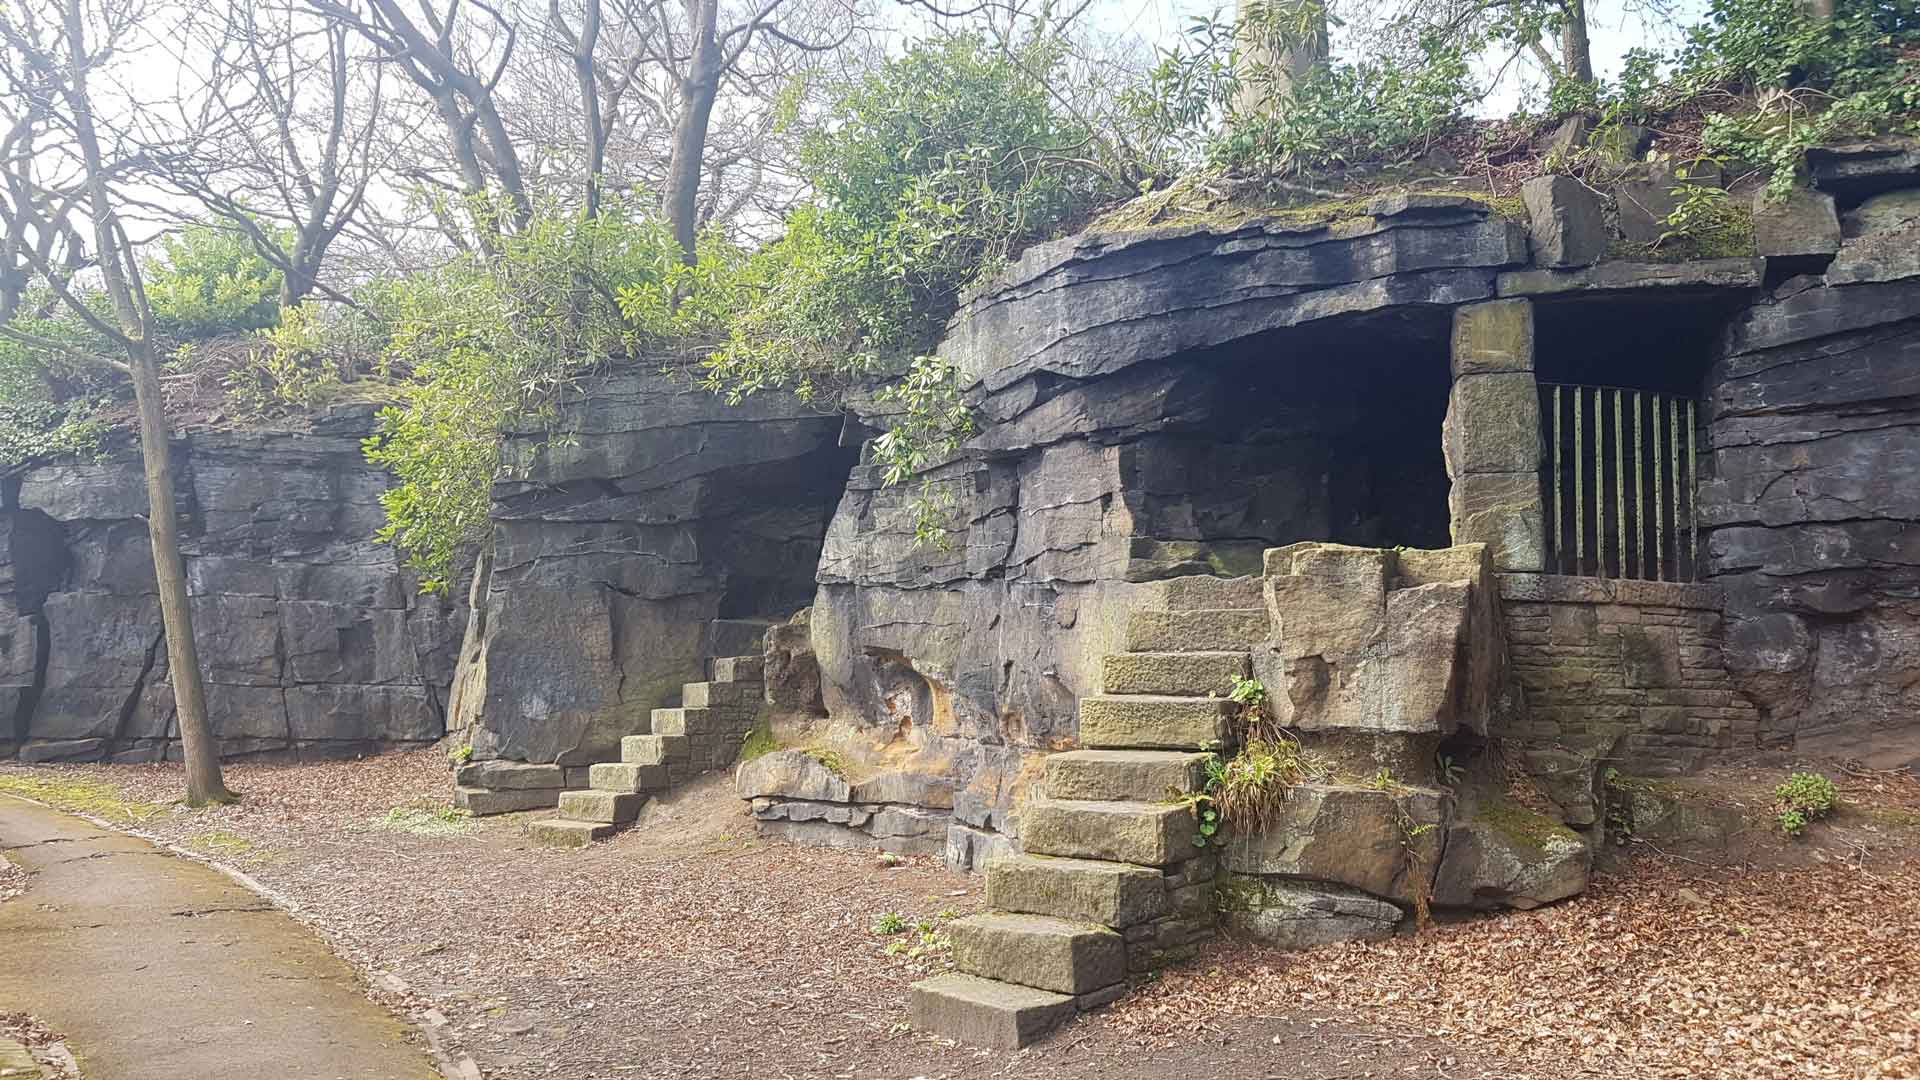 A photograph of some rock huts in a yorkshire woodland